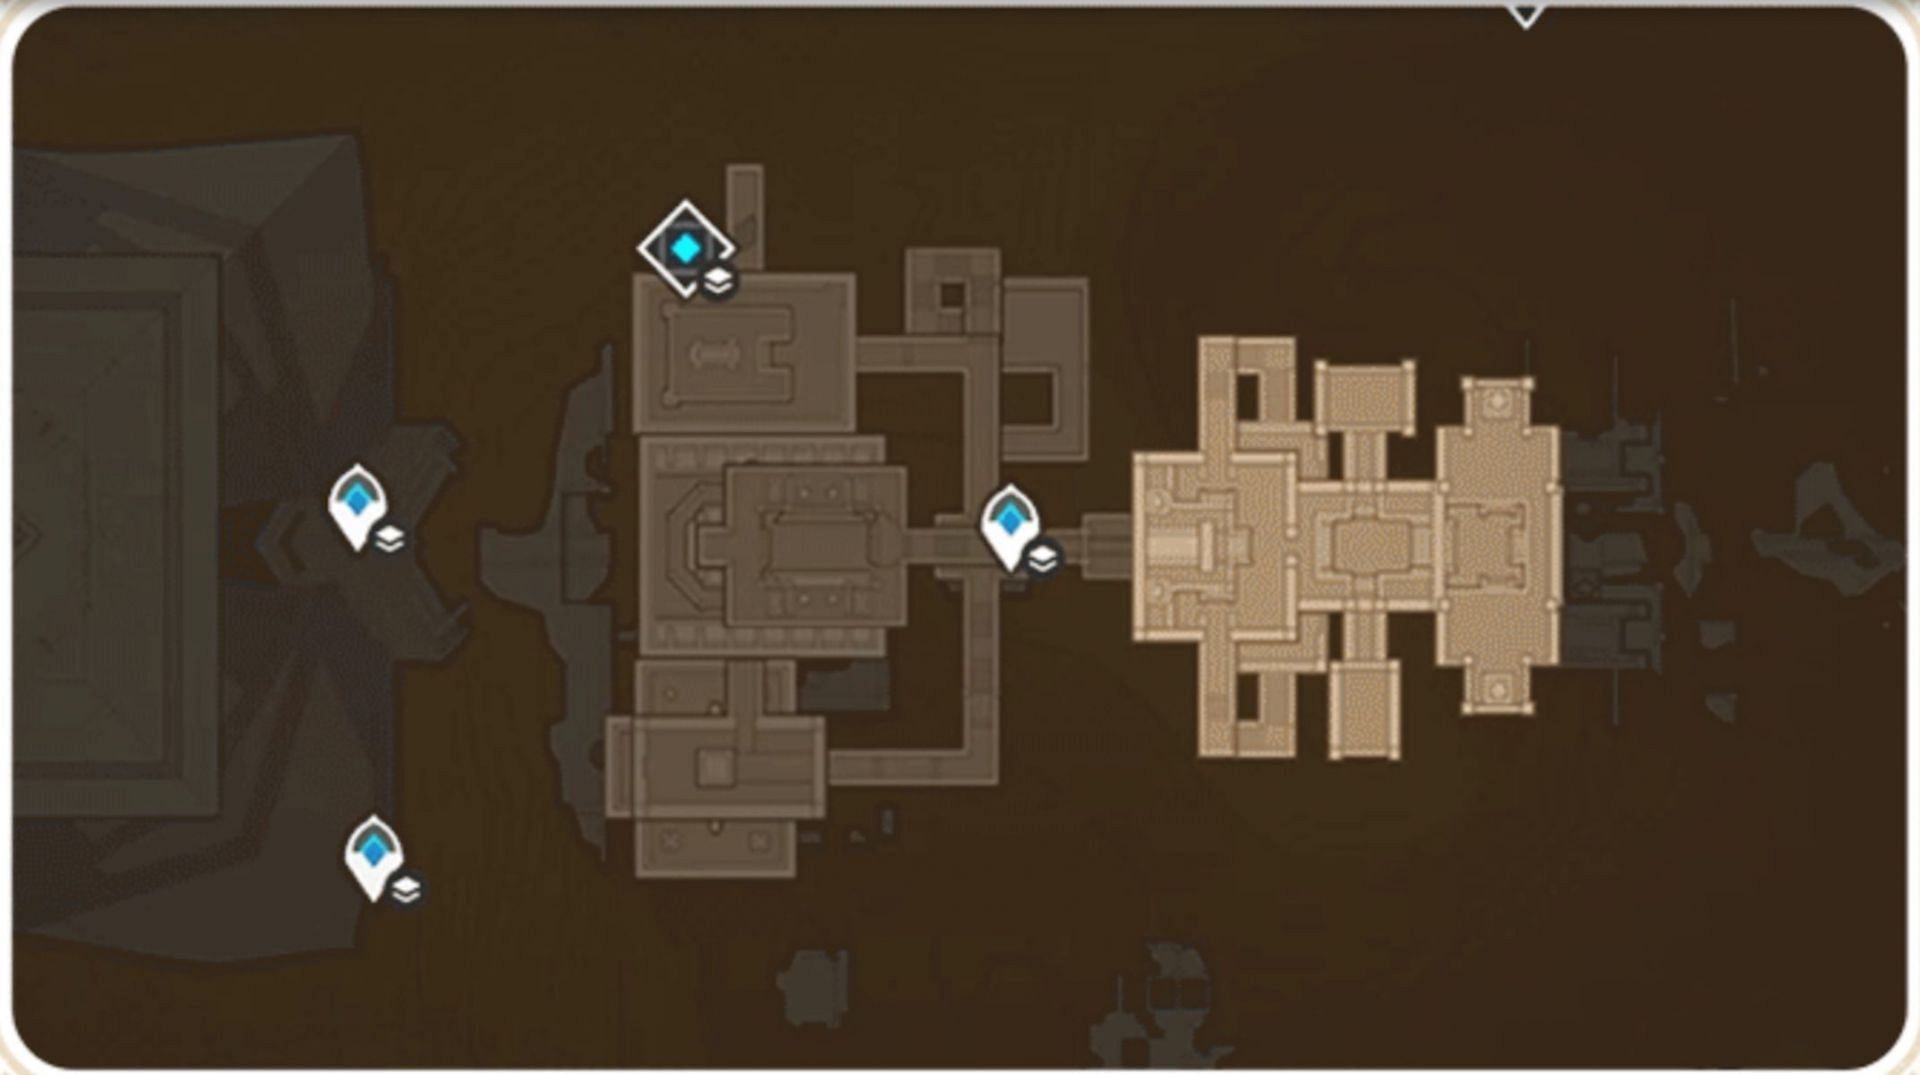 An example of an underground map (Image via HoYoverse)